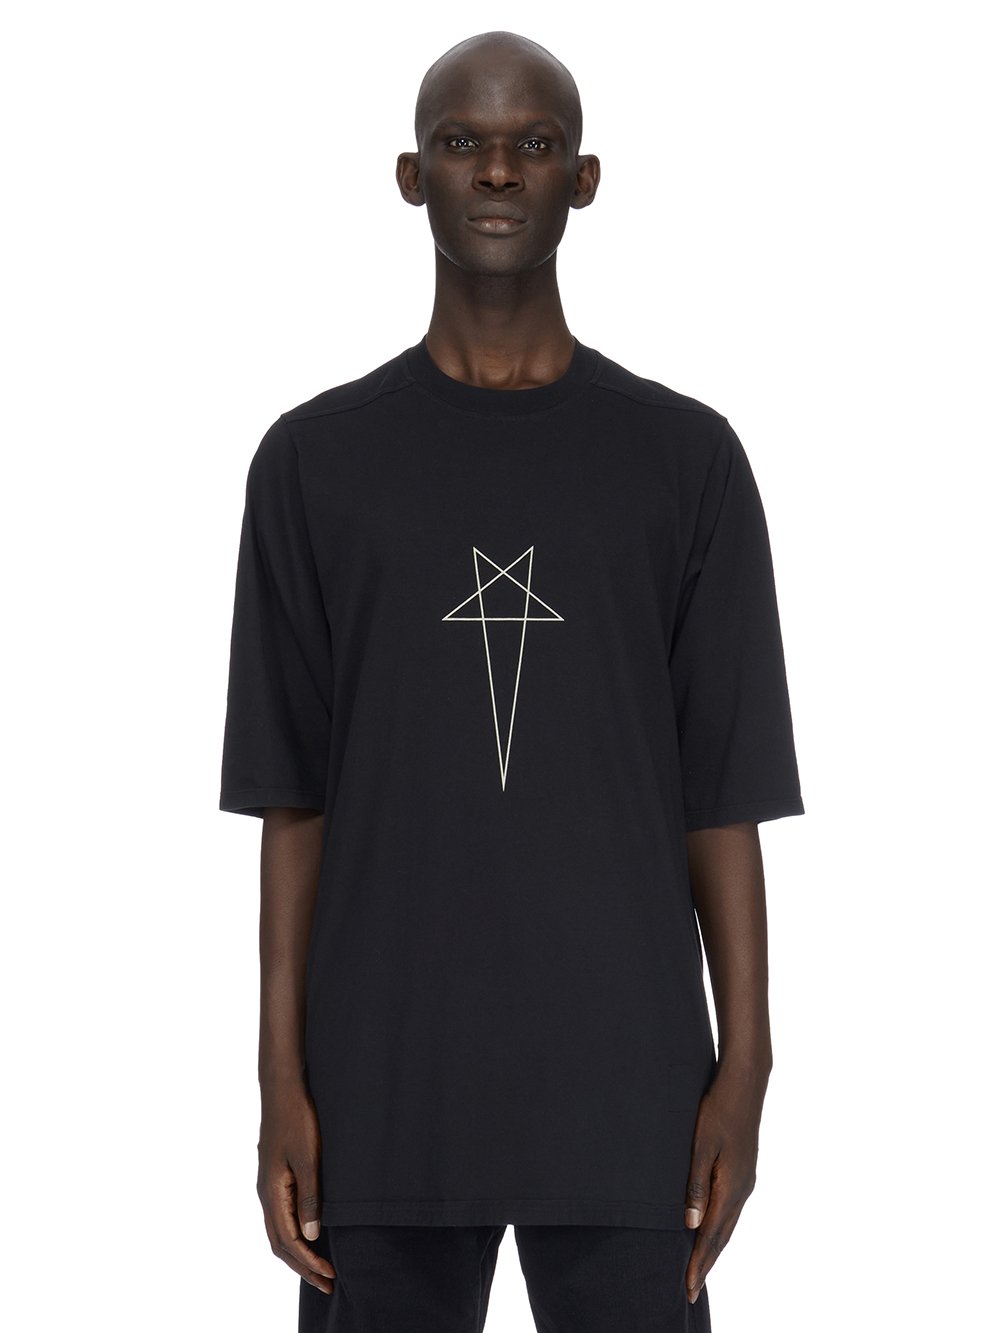 DRKSHDW FW23 LUXOR JUMBO SS T IN BLACK AND PEARL MEDIUM WEIGHT COTTON JERSEY